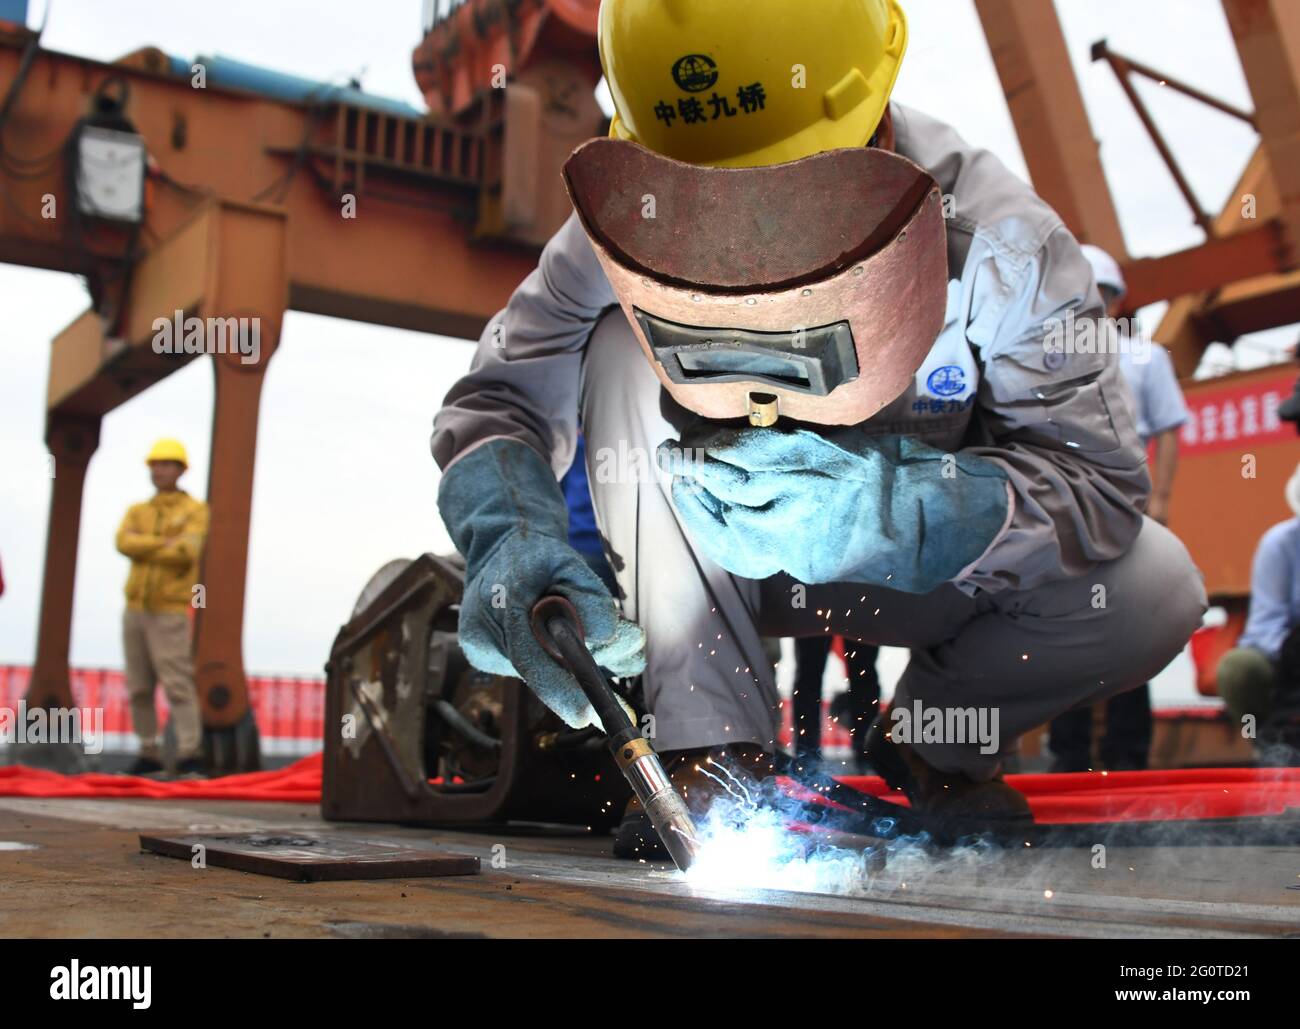 (210603) -- WUHAN, June 3, 2021 (Xinhua) -- A worker welds the last part of the steel girder at the closure segment of Bianyuzhou Yangtze River Bridge on the border of central China's Hubei Province and east China's Jiangxi Province, June 3, 2021. Connecting Huangmei County of central China's Hubei Province and Jiujiang City of east China's Jiangxi Province, the bridge is part of Anqing-Jiujiang Railway. The railway has a designed speed of 350 kilometers per hour for the two high speed lines and 200 kilometers per hour for the other two reserved passenger and freight lines. (Xinhua/Cheng Min) Stock Photo